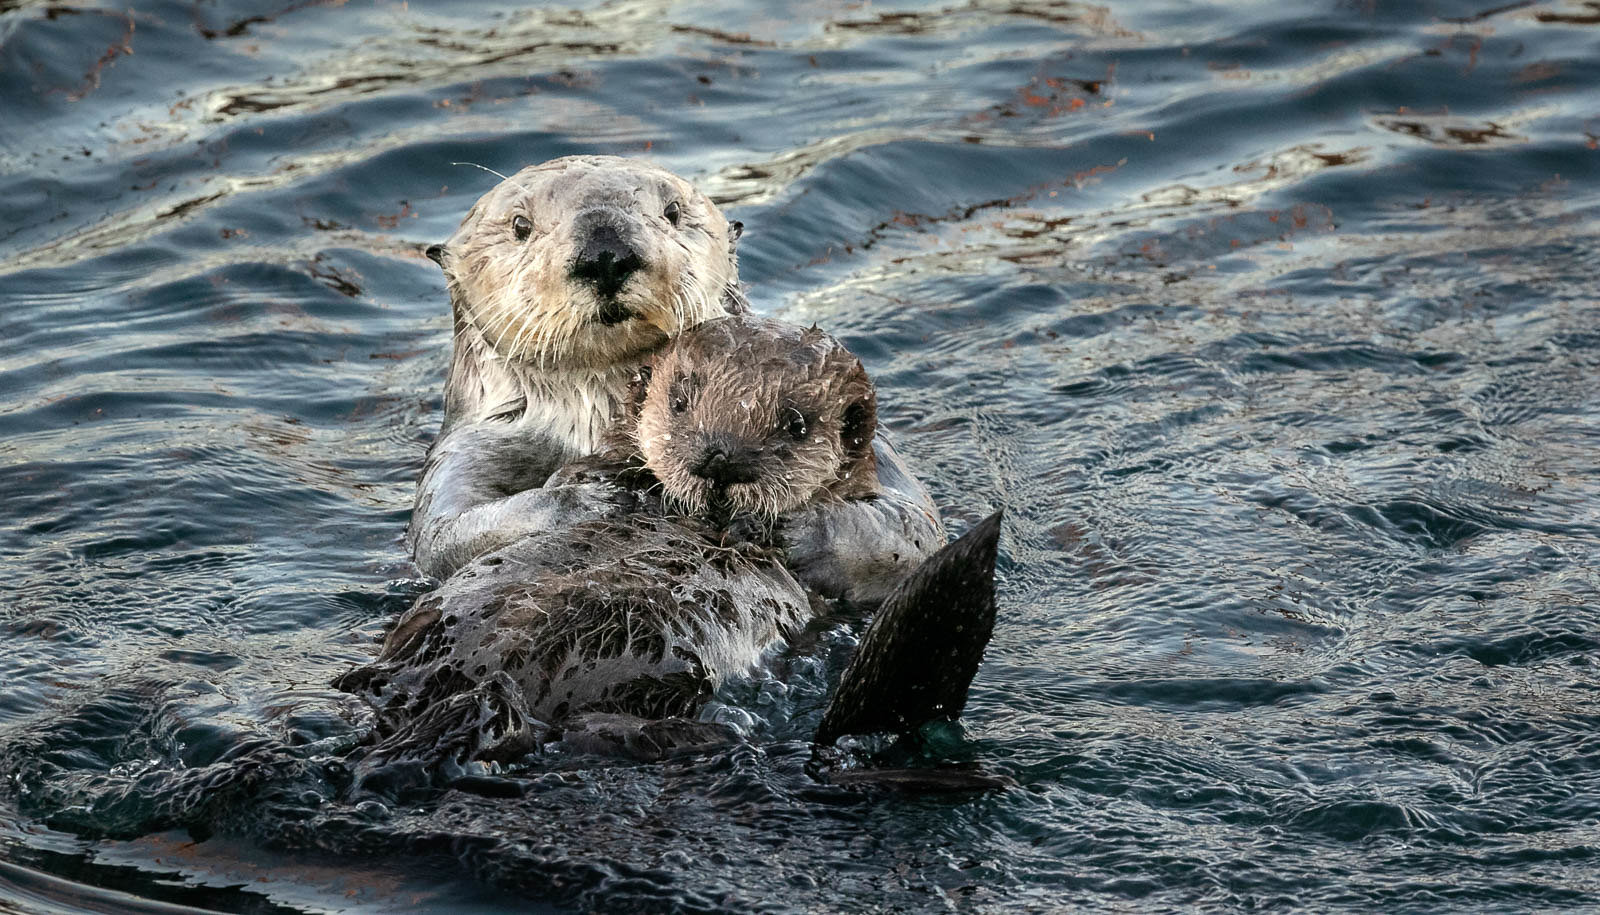 A sea otter and her young - very cute